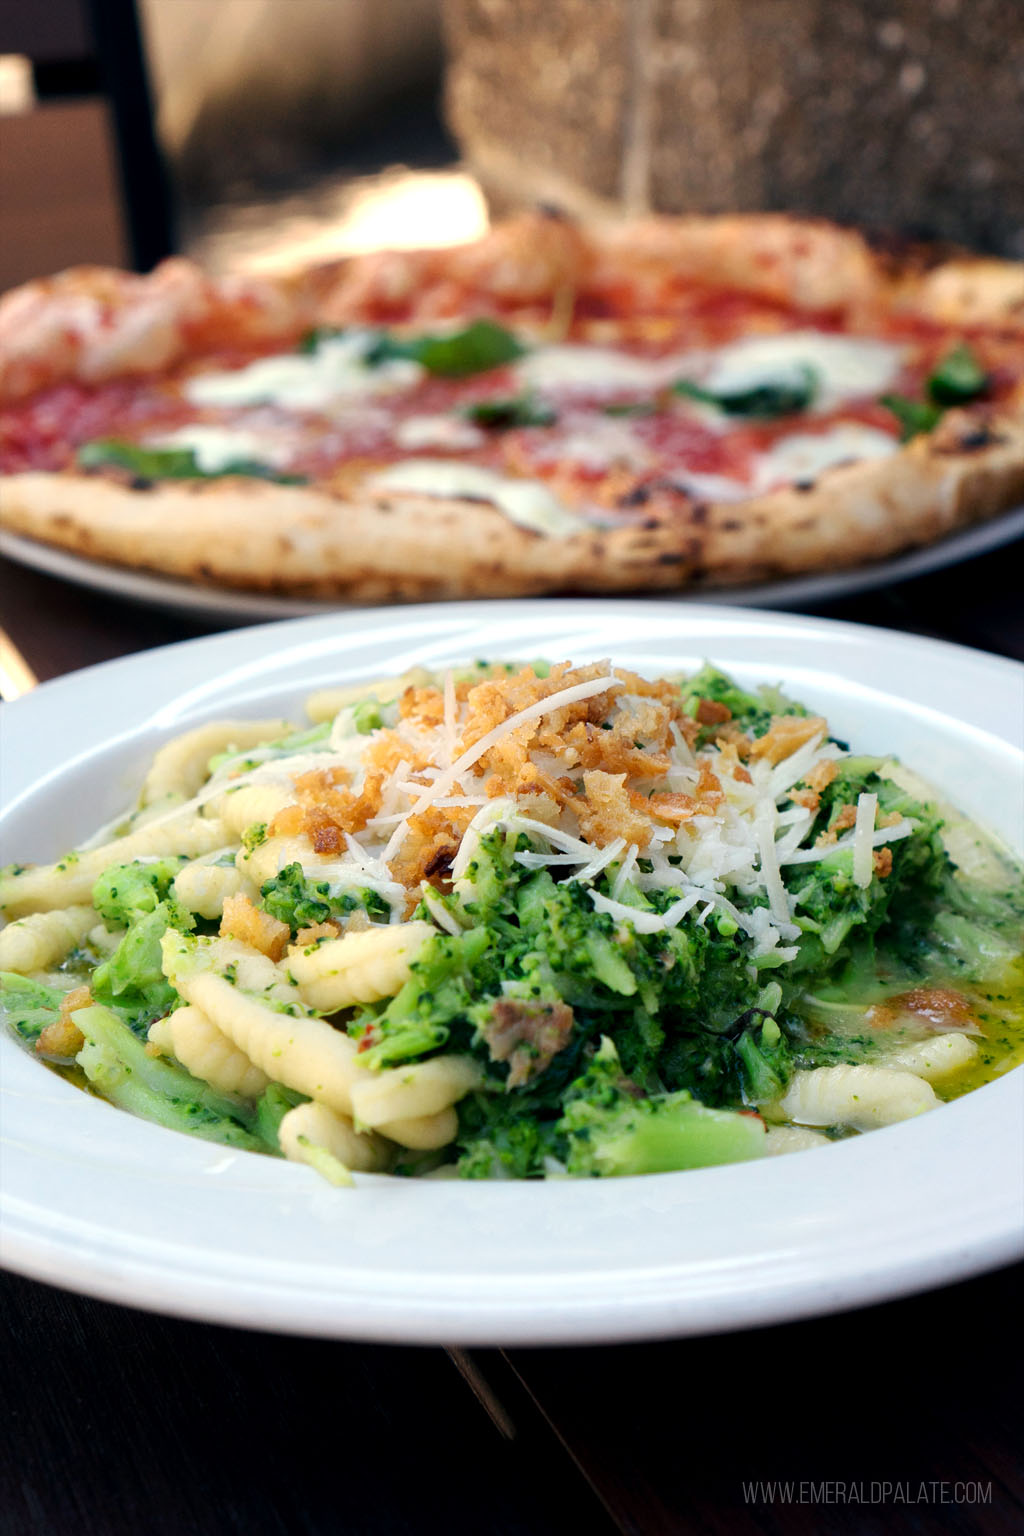 cavatelli and broccoli pasta with pizza in the background